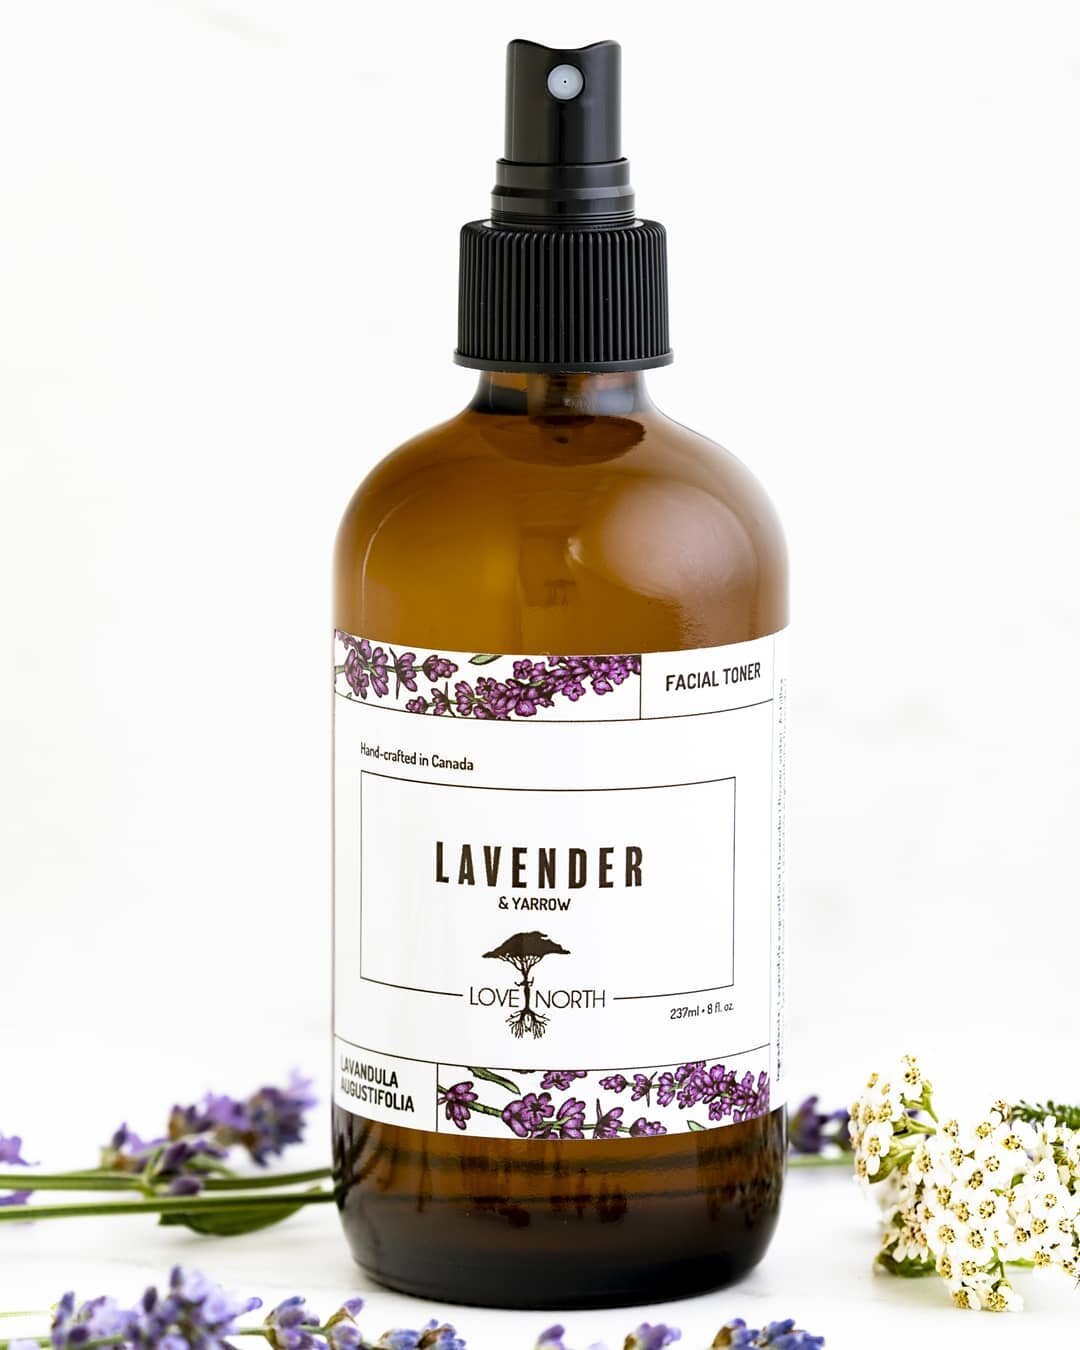 Our Lavender facial toner has been reformulated and a plant ally named Yarrow (Achillea millefolium) has been added. 

This facial toner is most ideal for those with inflammation of the skin and or acne. Yarrow &amp; lavender come together to gently 